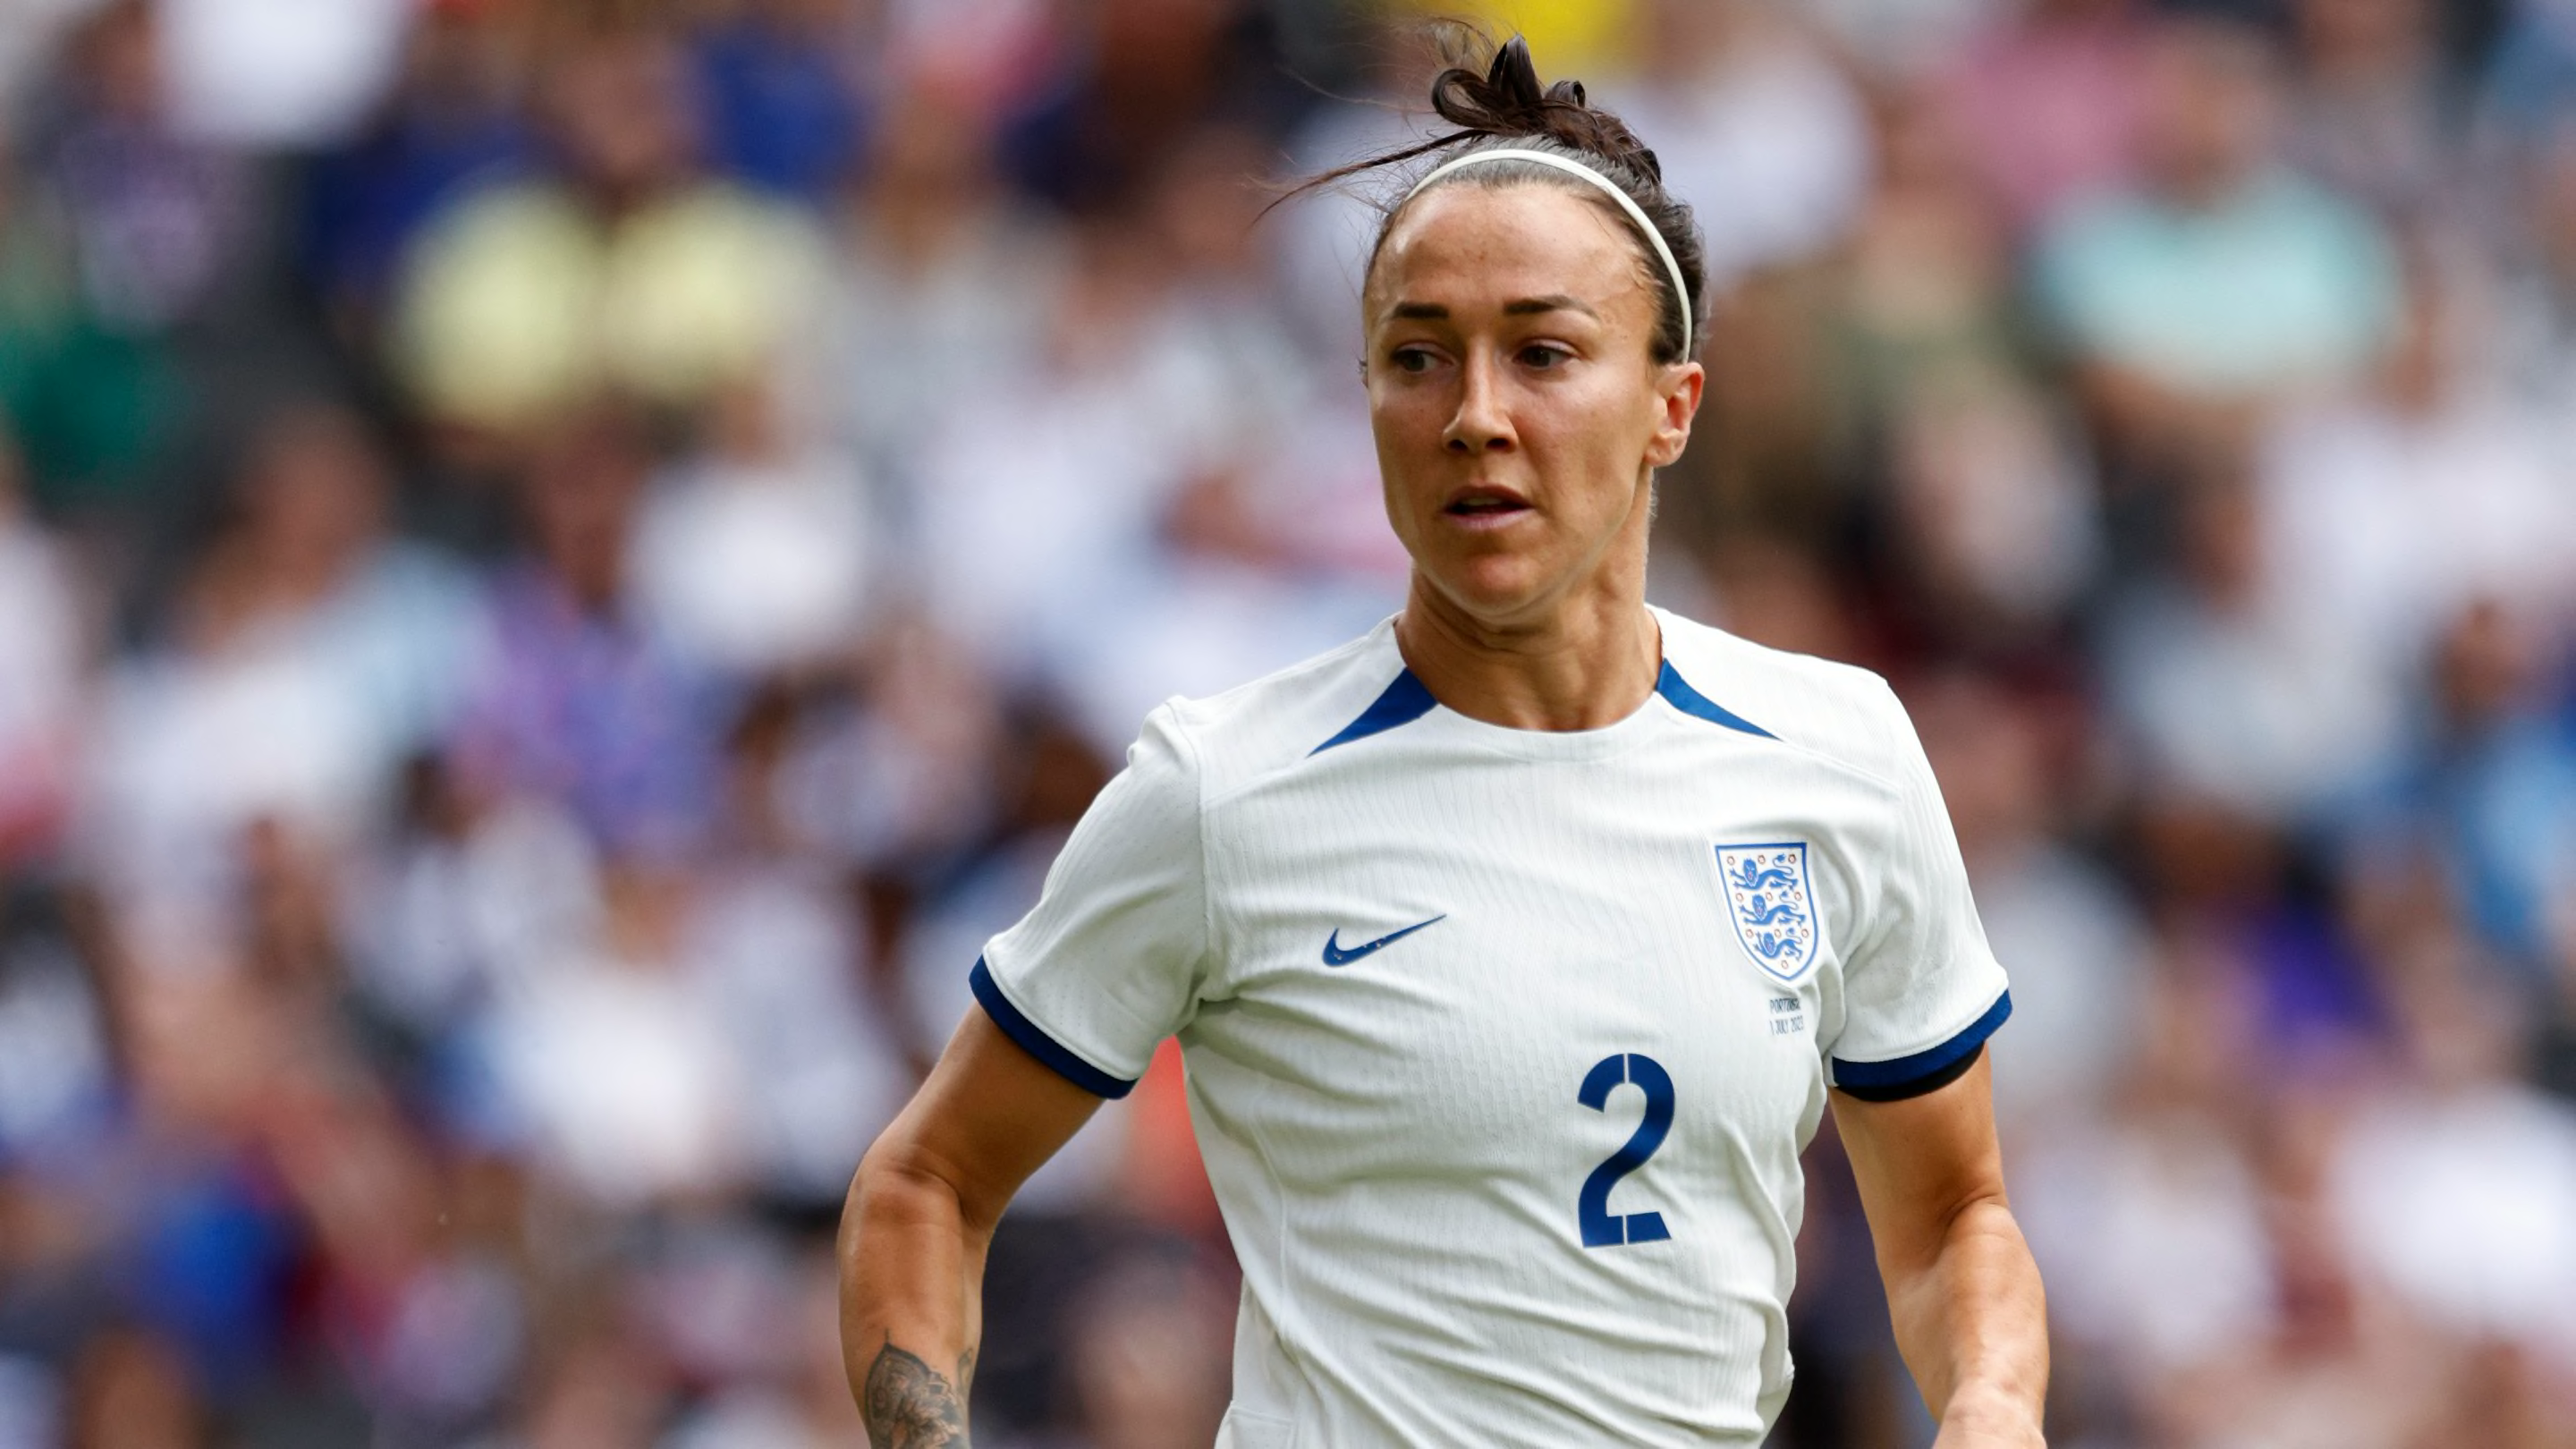 Lucy Bronze: The World Cup is so much bigger than the Euros